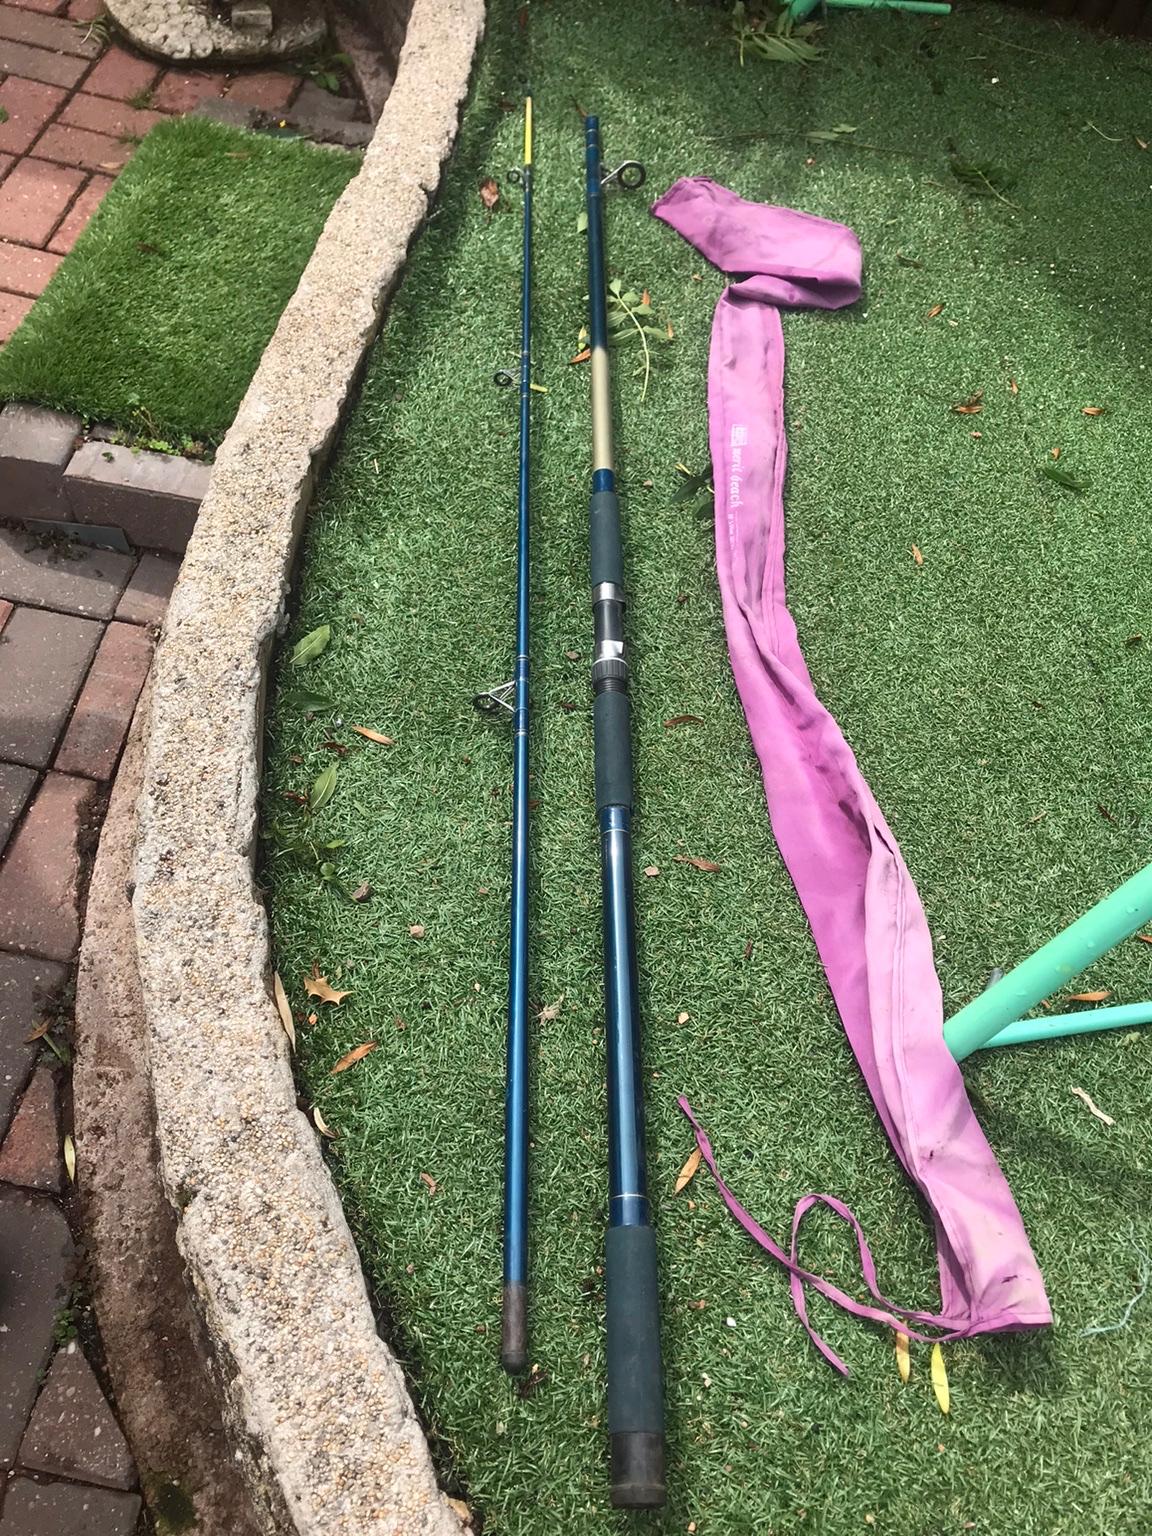 Leeda beach fishing rod in DY8 Dudley for £12.00 for sale